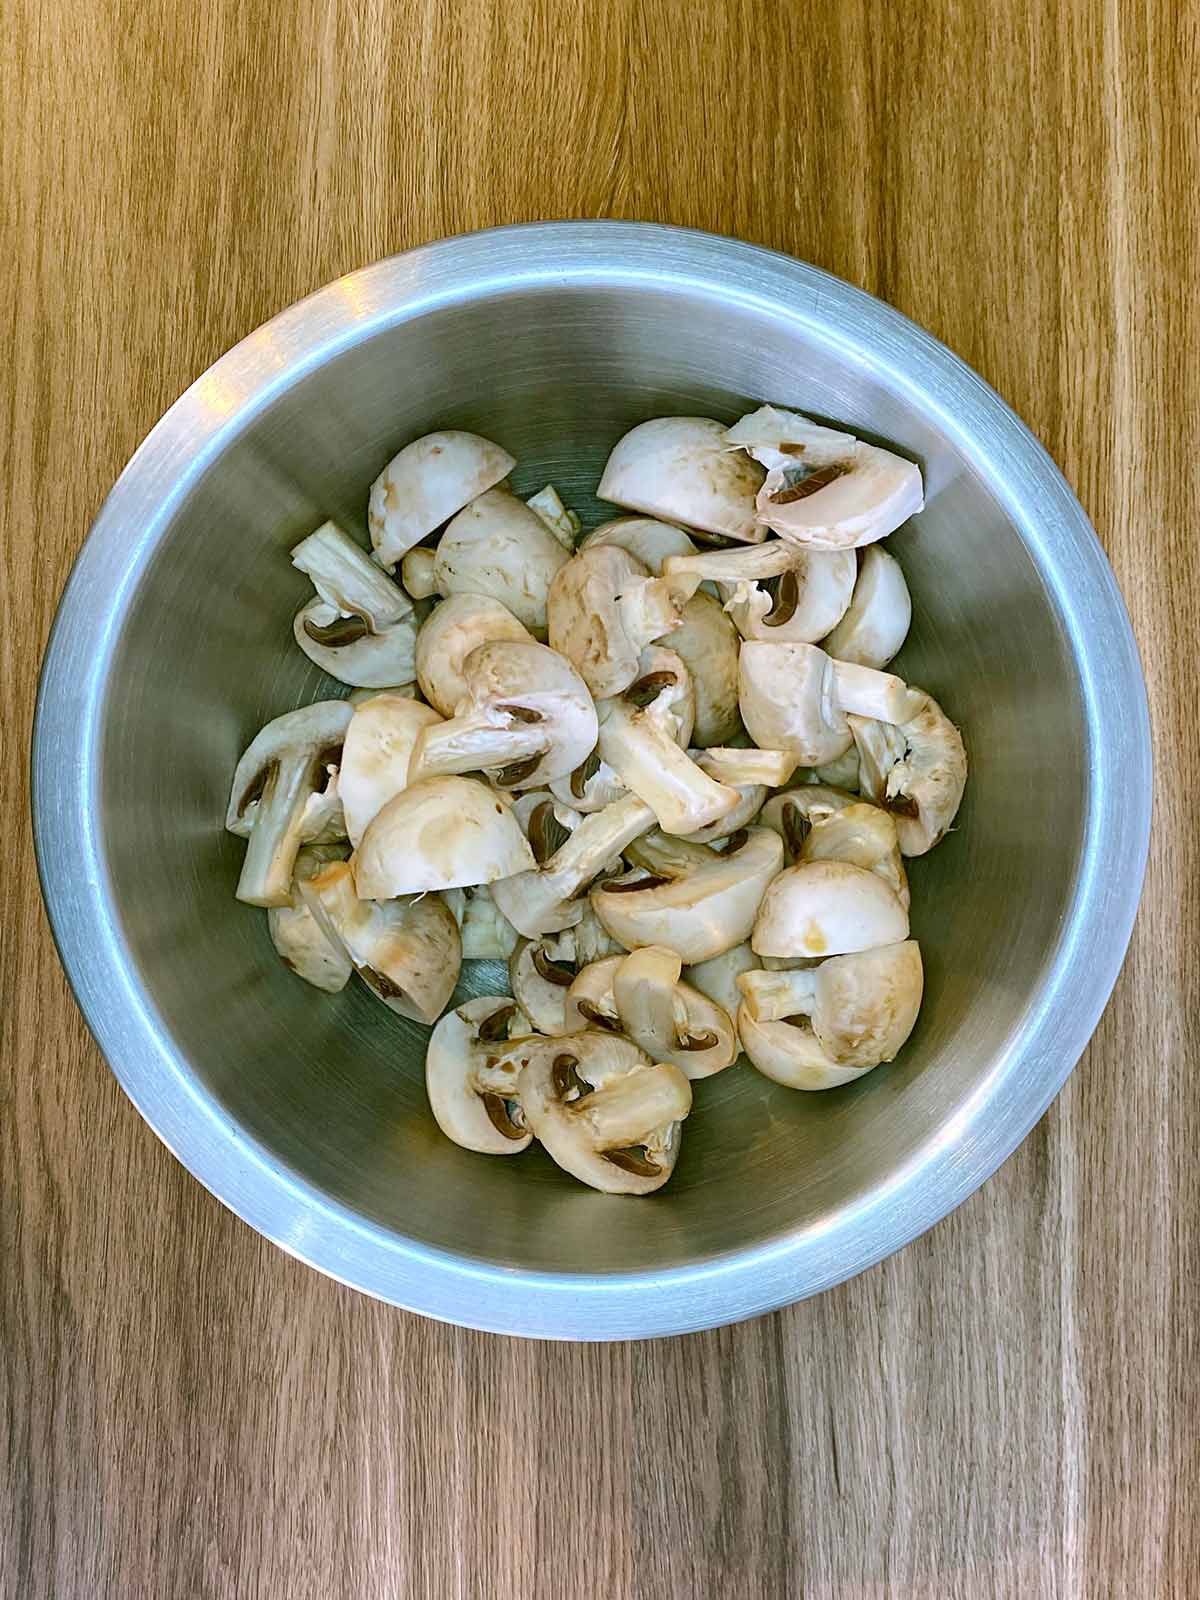 Halved mushrooms in a mixing bowl.